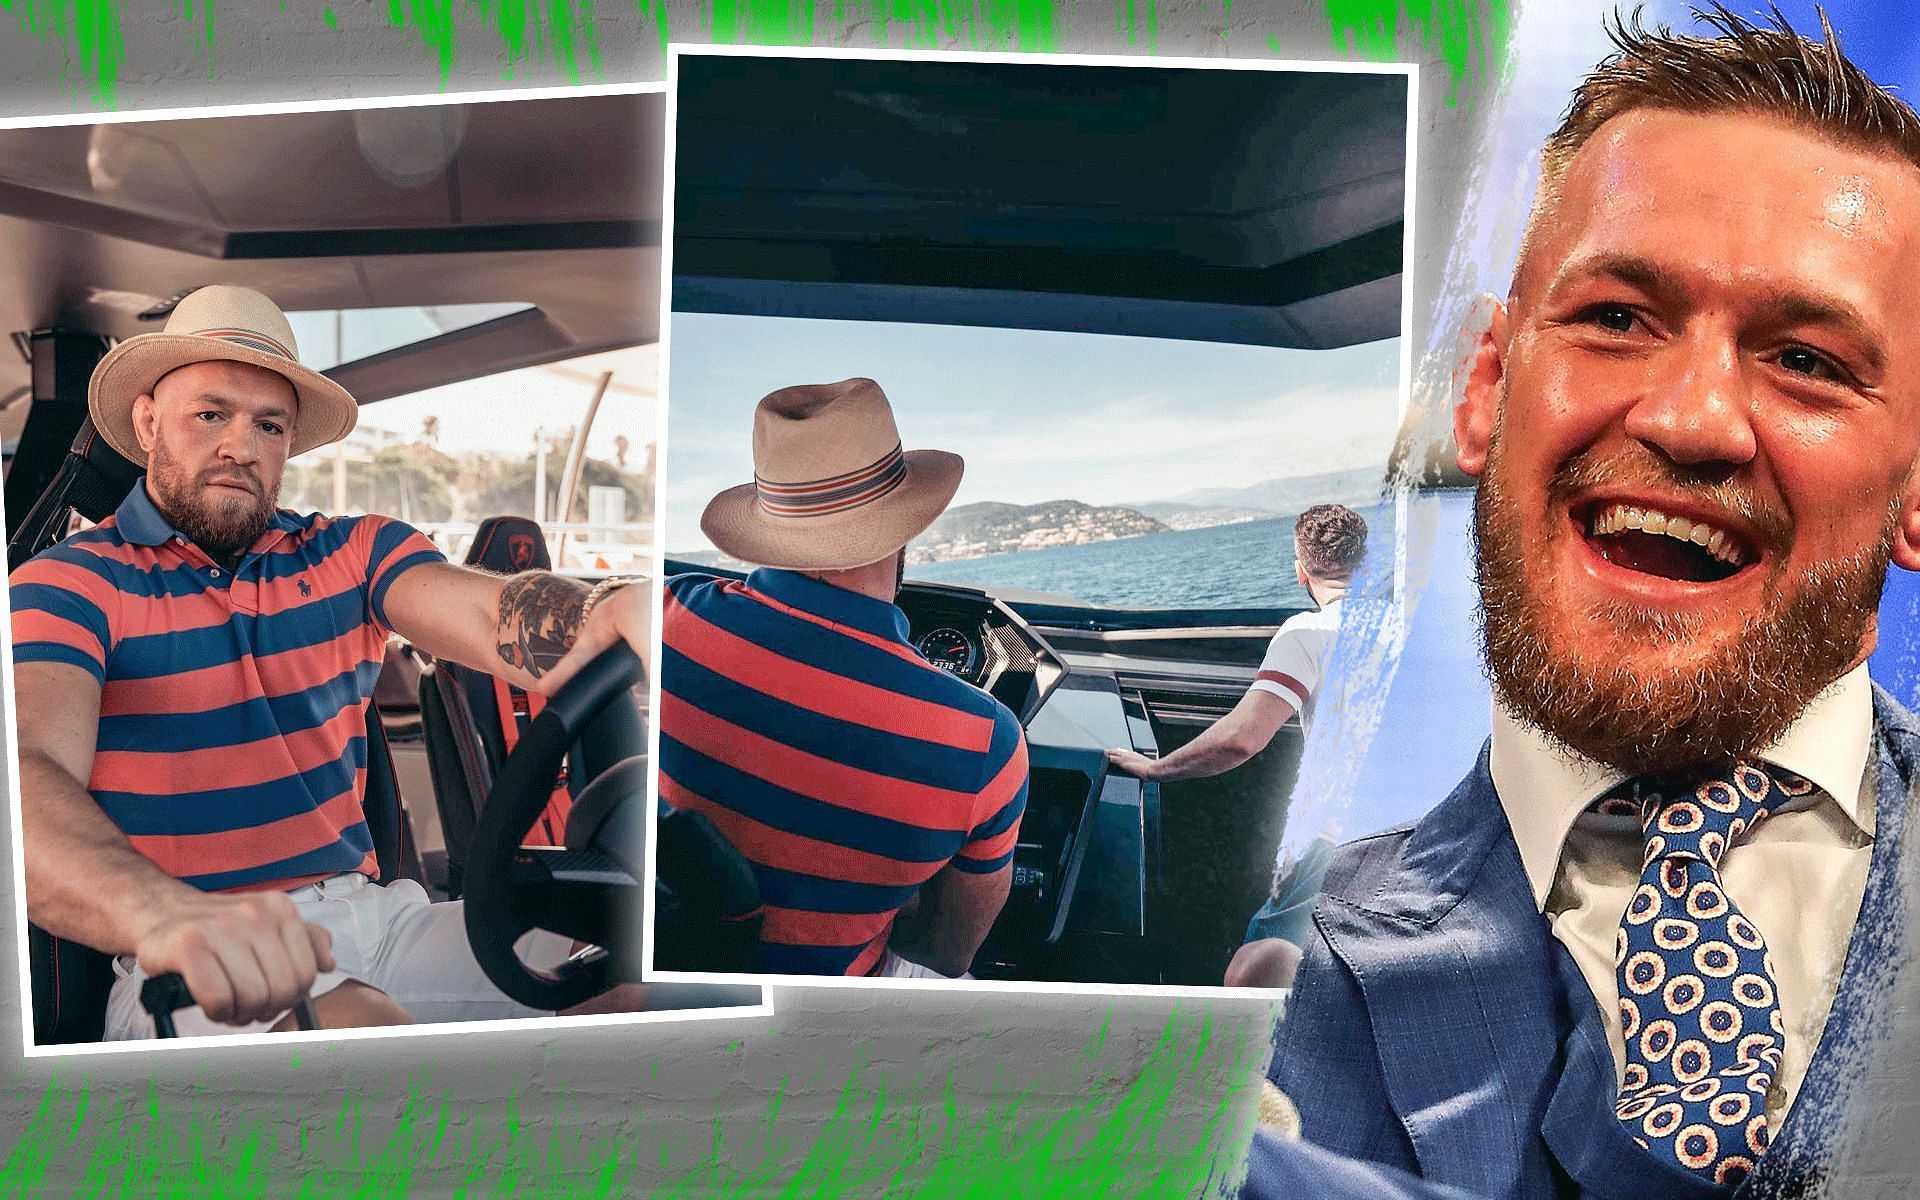 Conor McGregor [Images on the left via @thenotoriousmma on Instagram]